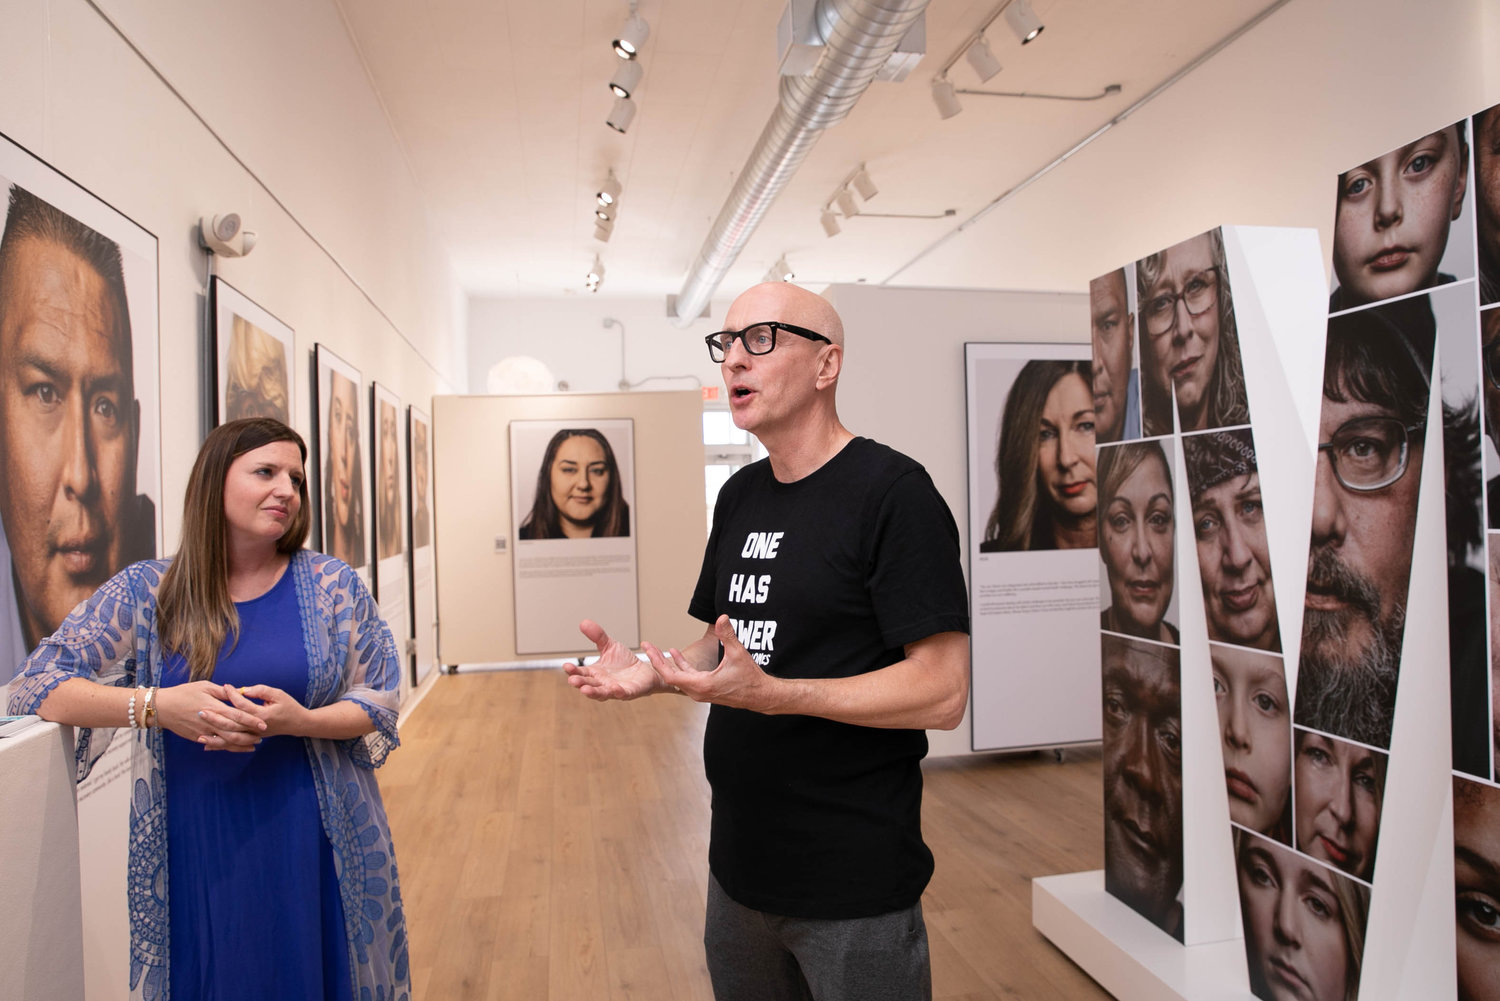 MAKING ART: Artist Randy Bacon, right, discusses the connection he made with Burrell Foundation Executive Director Gabrielle Martin to create "The Art of Being Me" exhibit.